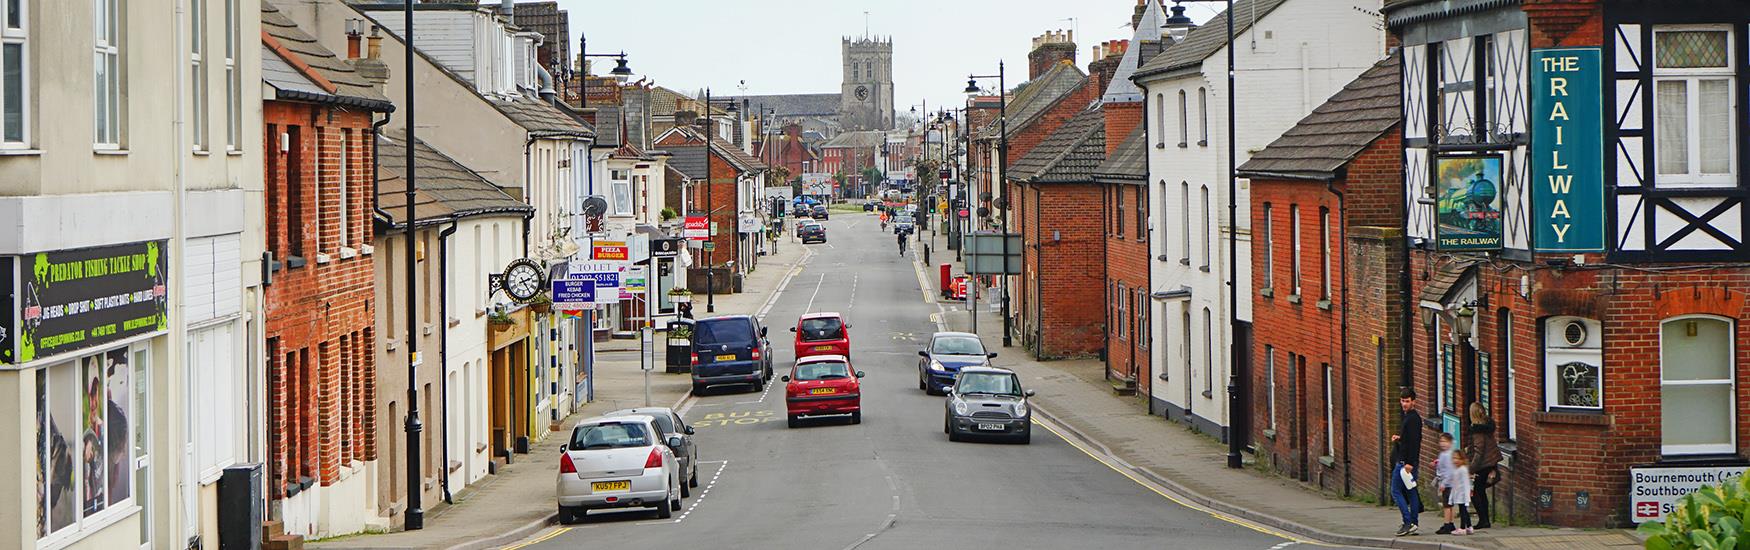 Main road into Christchurch high street with pubs and the priory in the background